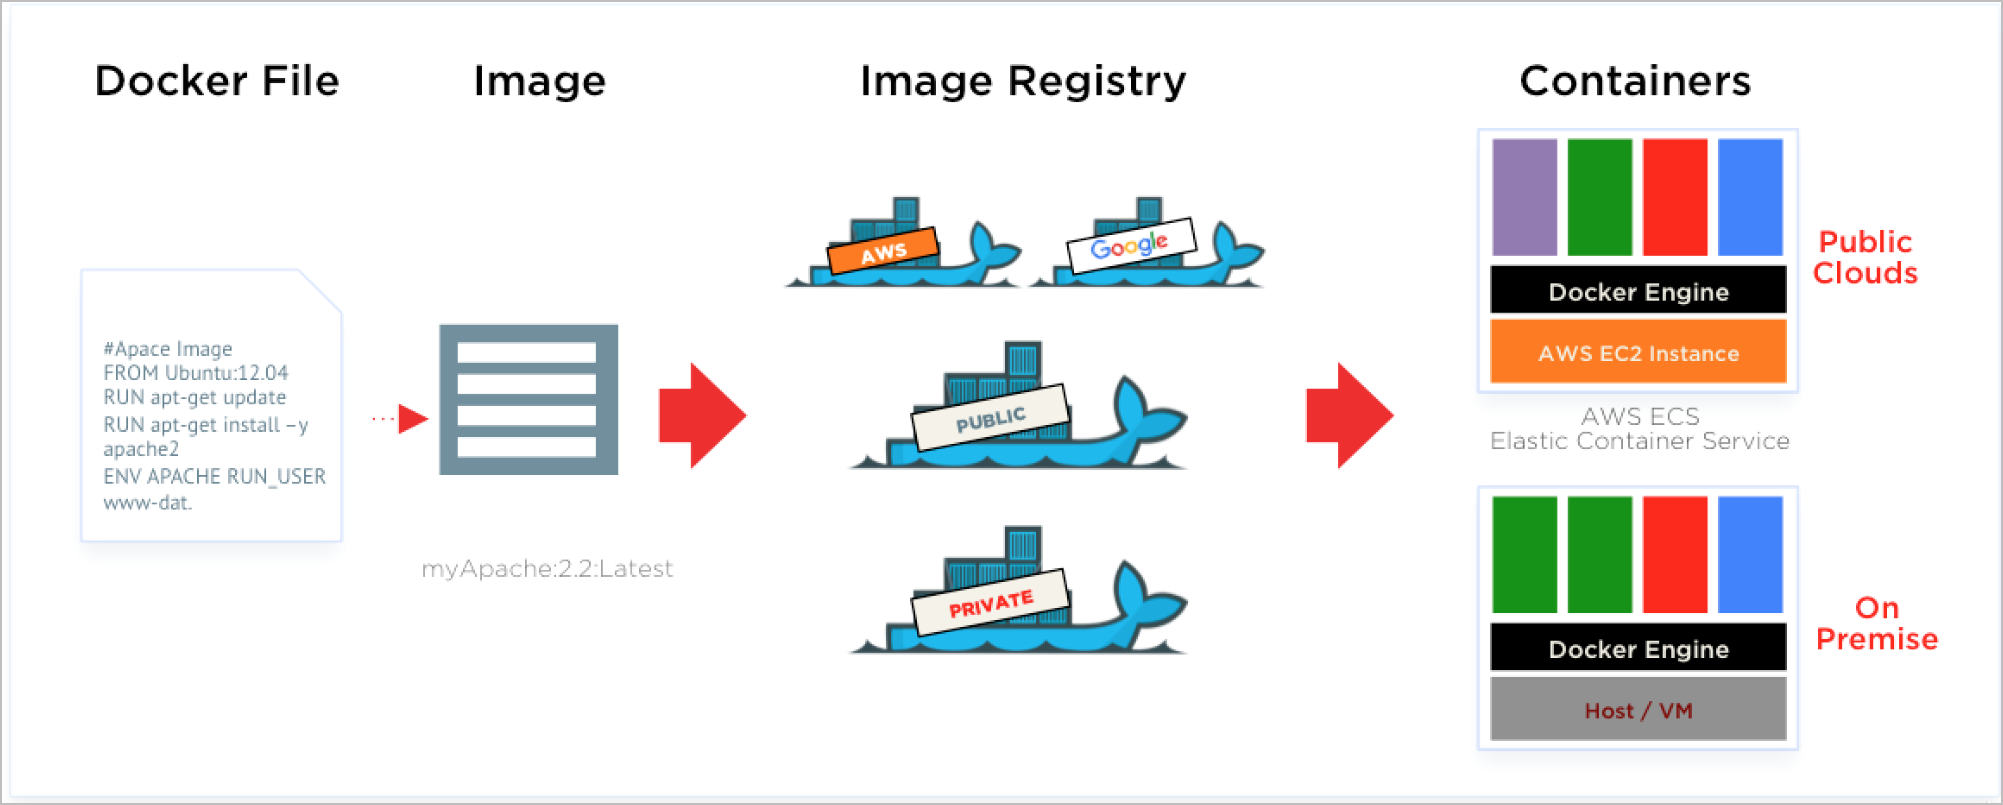 Container concepts: containers are created from images present in an image registry.